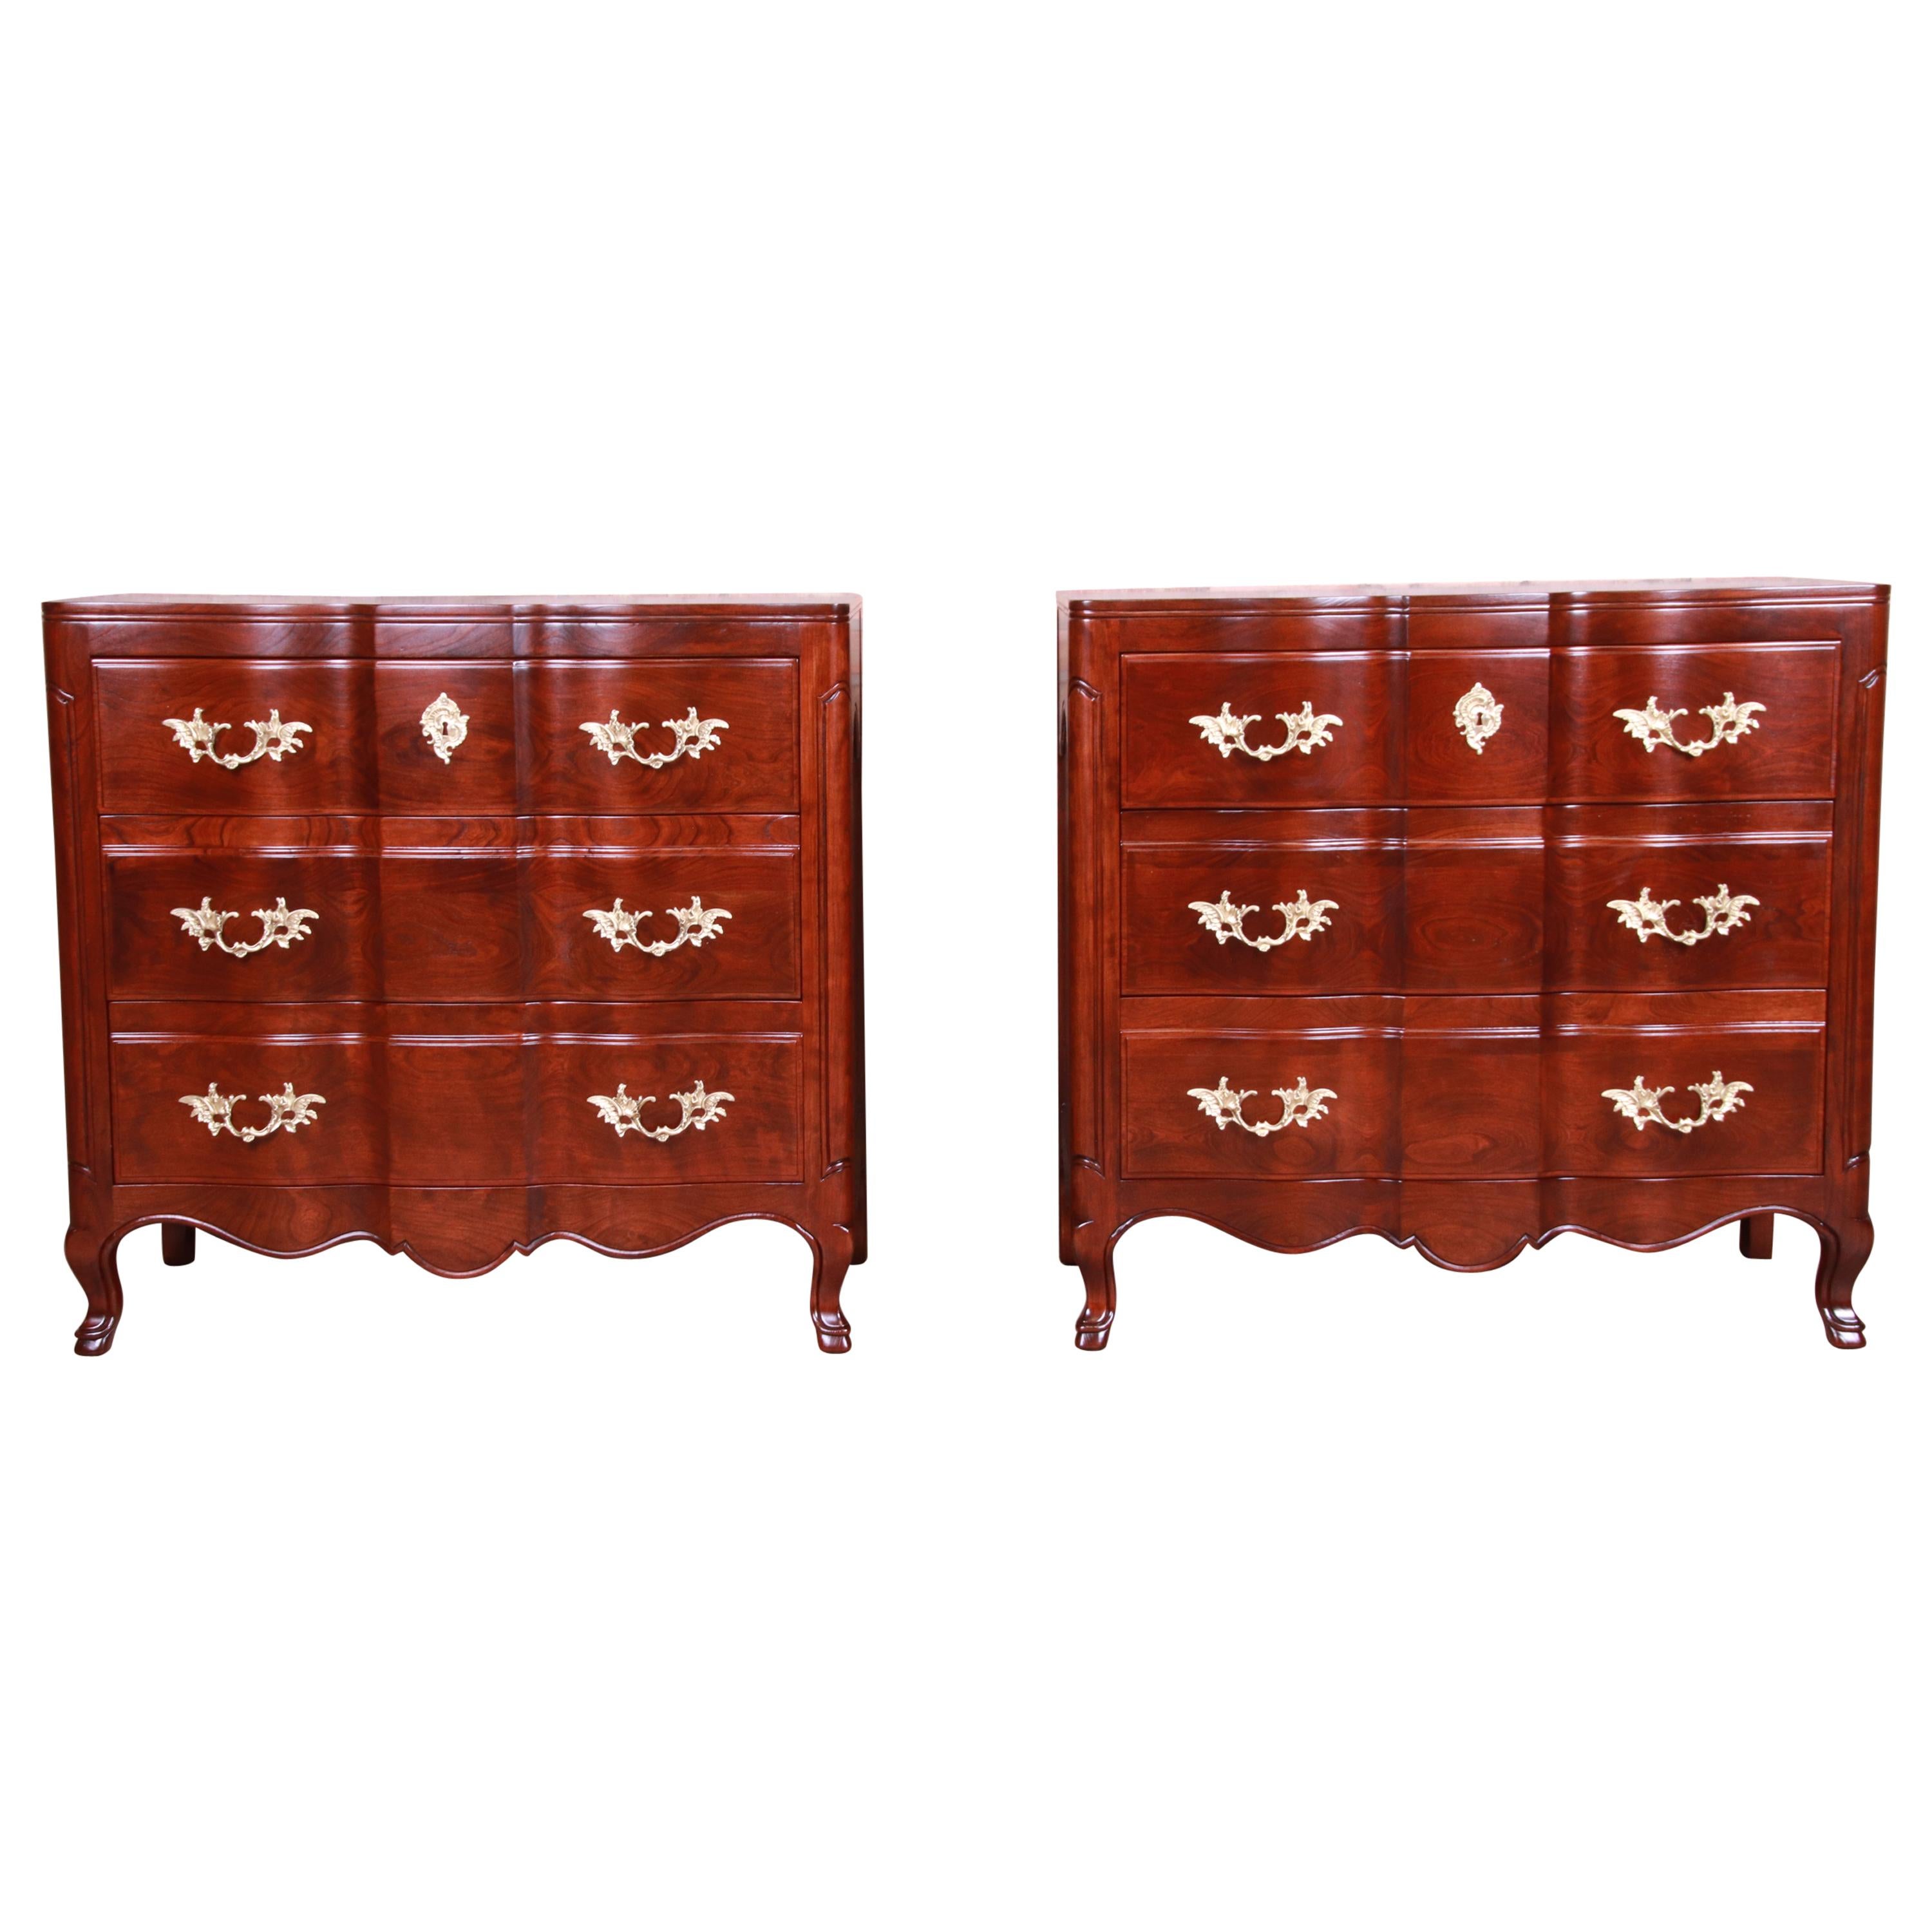 John Widdicomb French Provincial Louis XV Bedside Chests, Newly Refinished